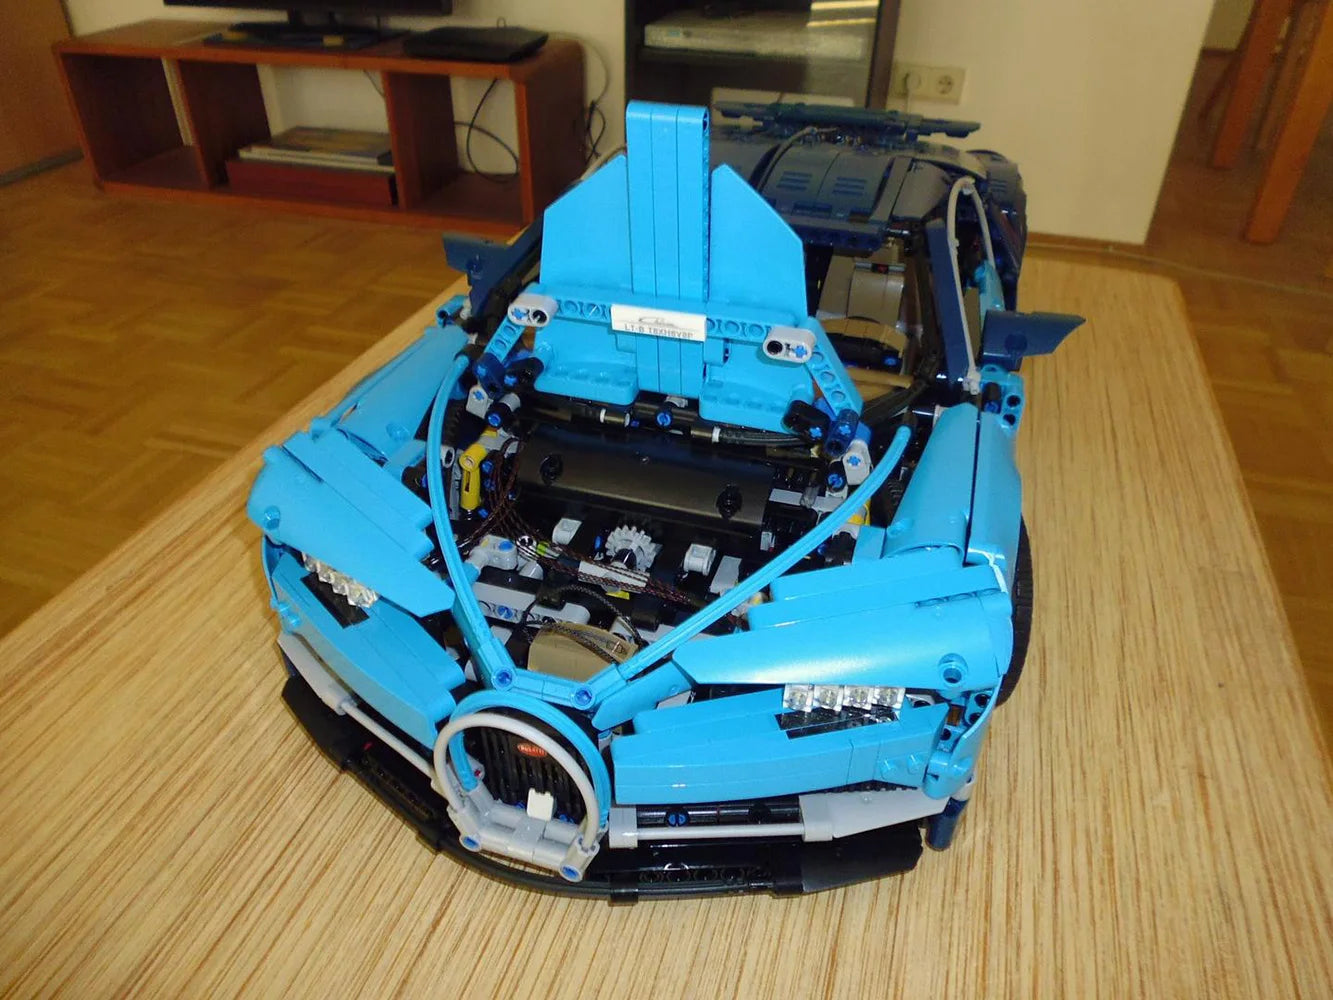 Bugatti Chiron Race Car Building Kit and Engineering toy 86001 (4024pcs)